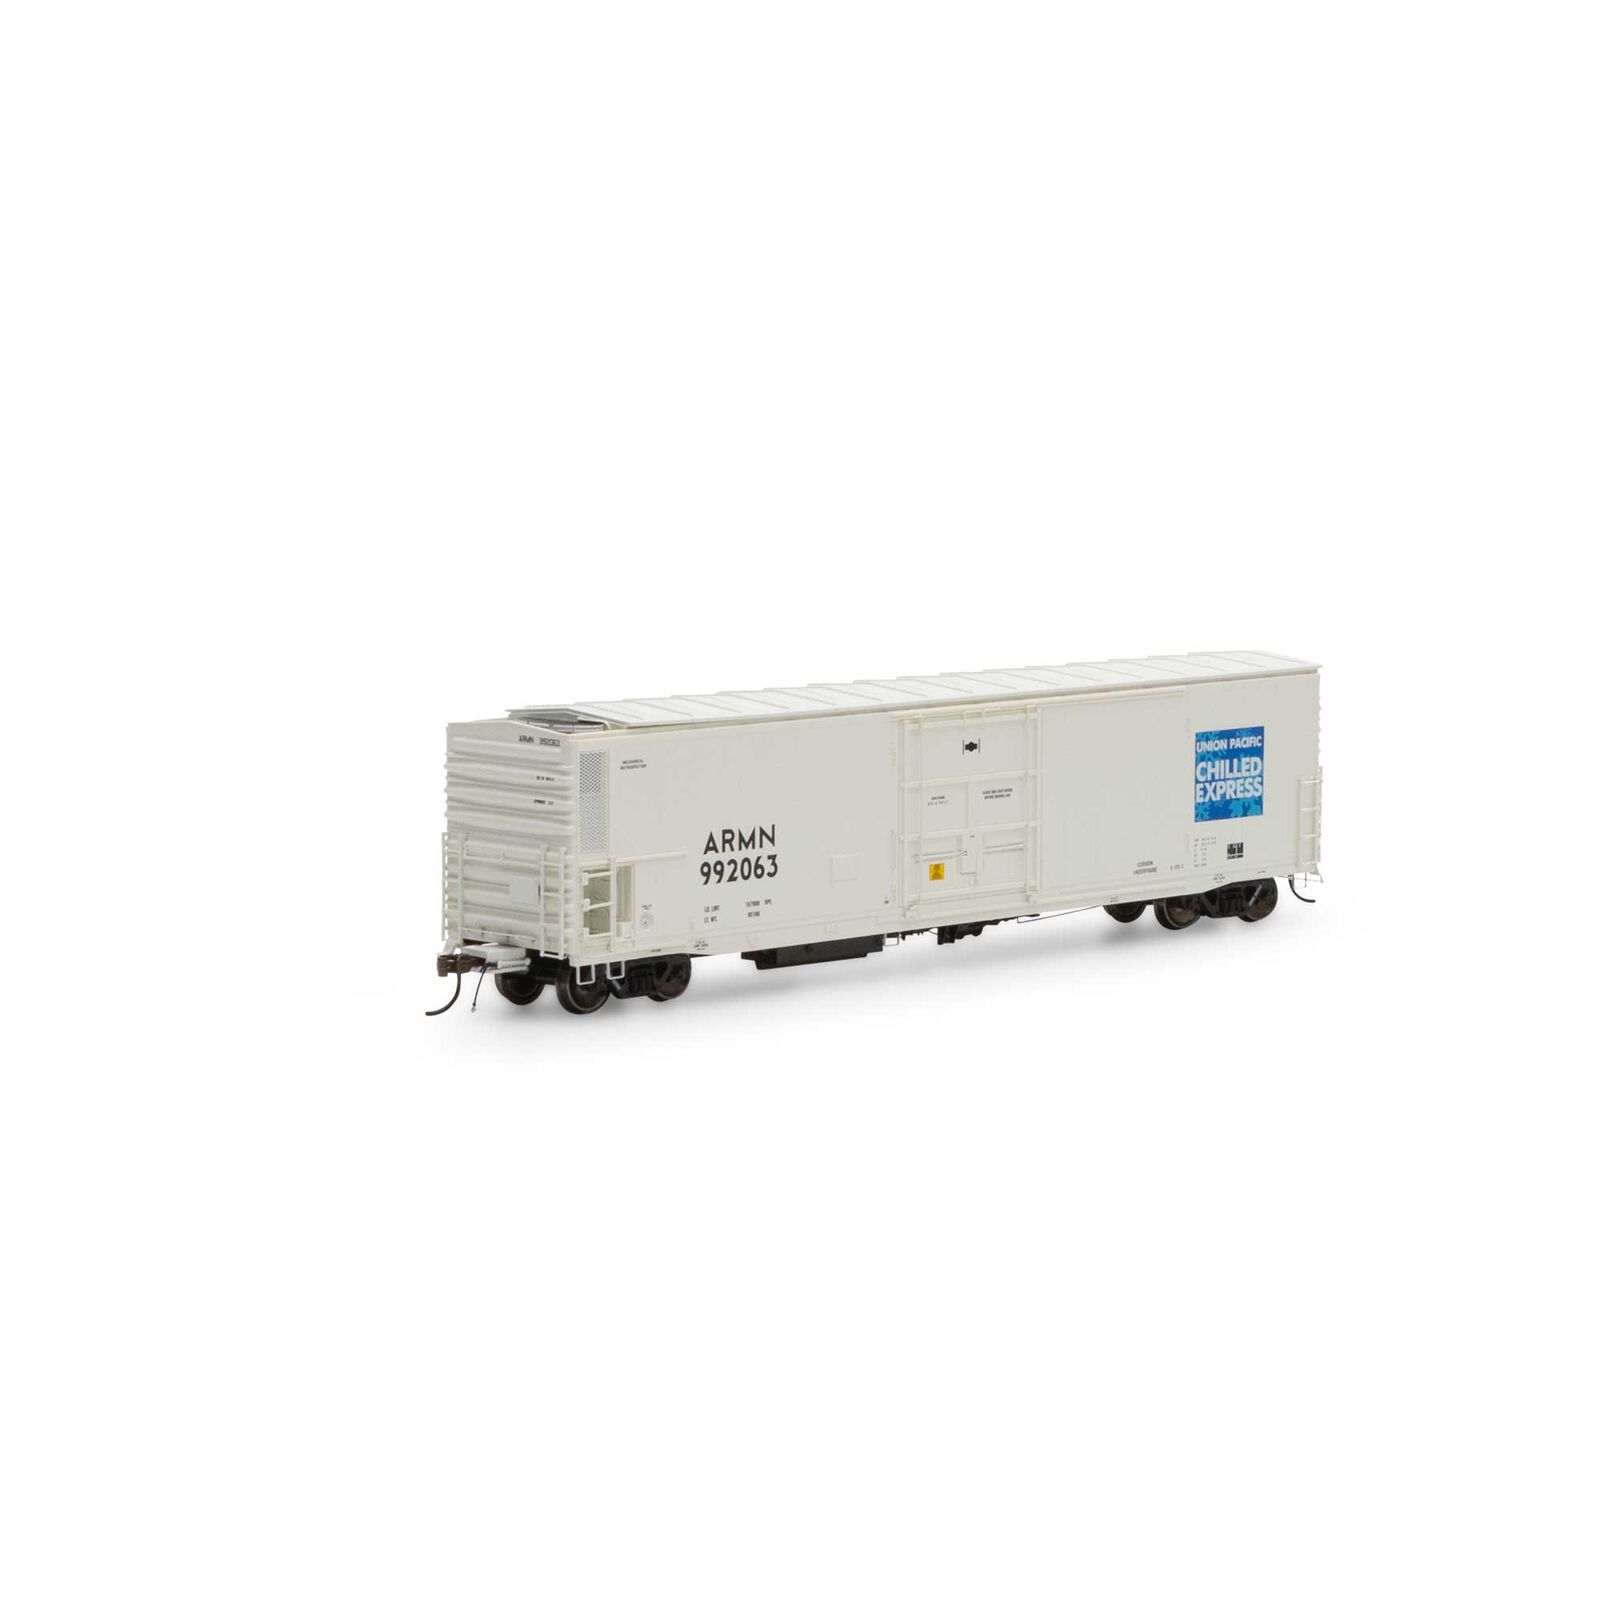 HO 57' Mechanical Reefer with Sound, UP/ARMN #992063